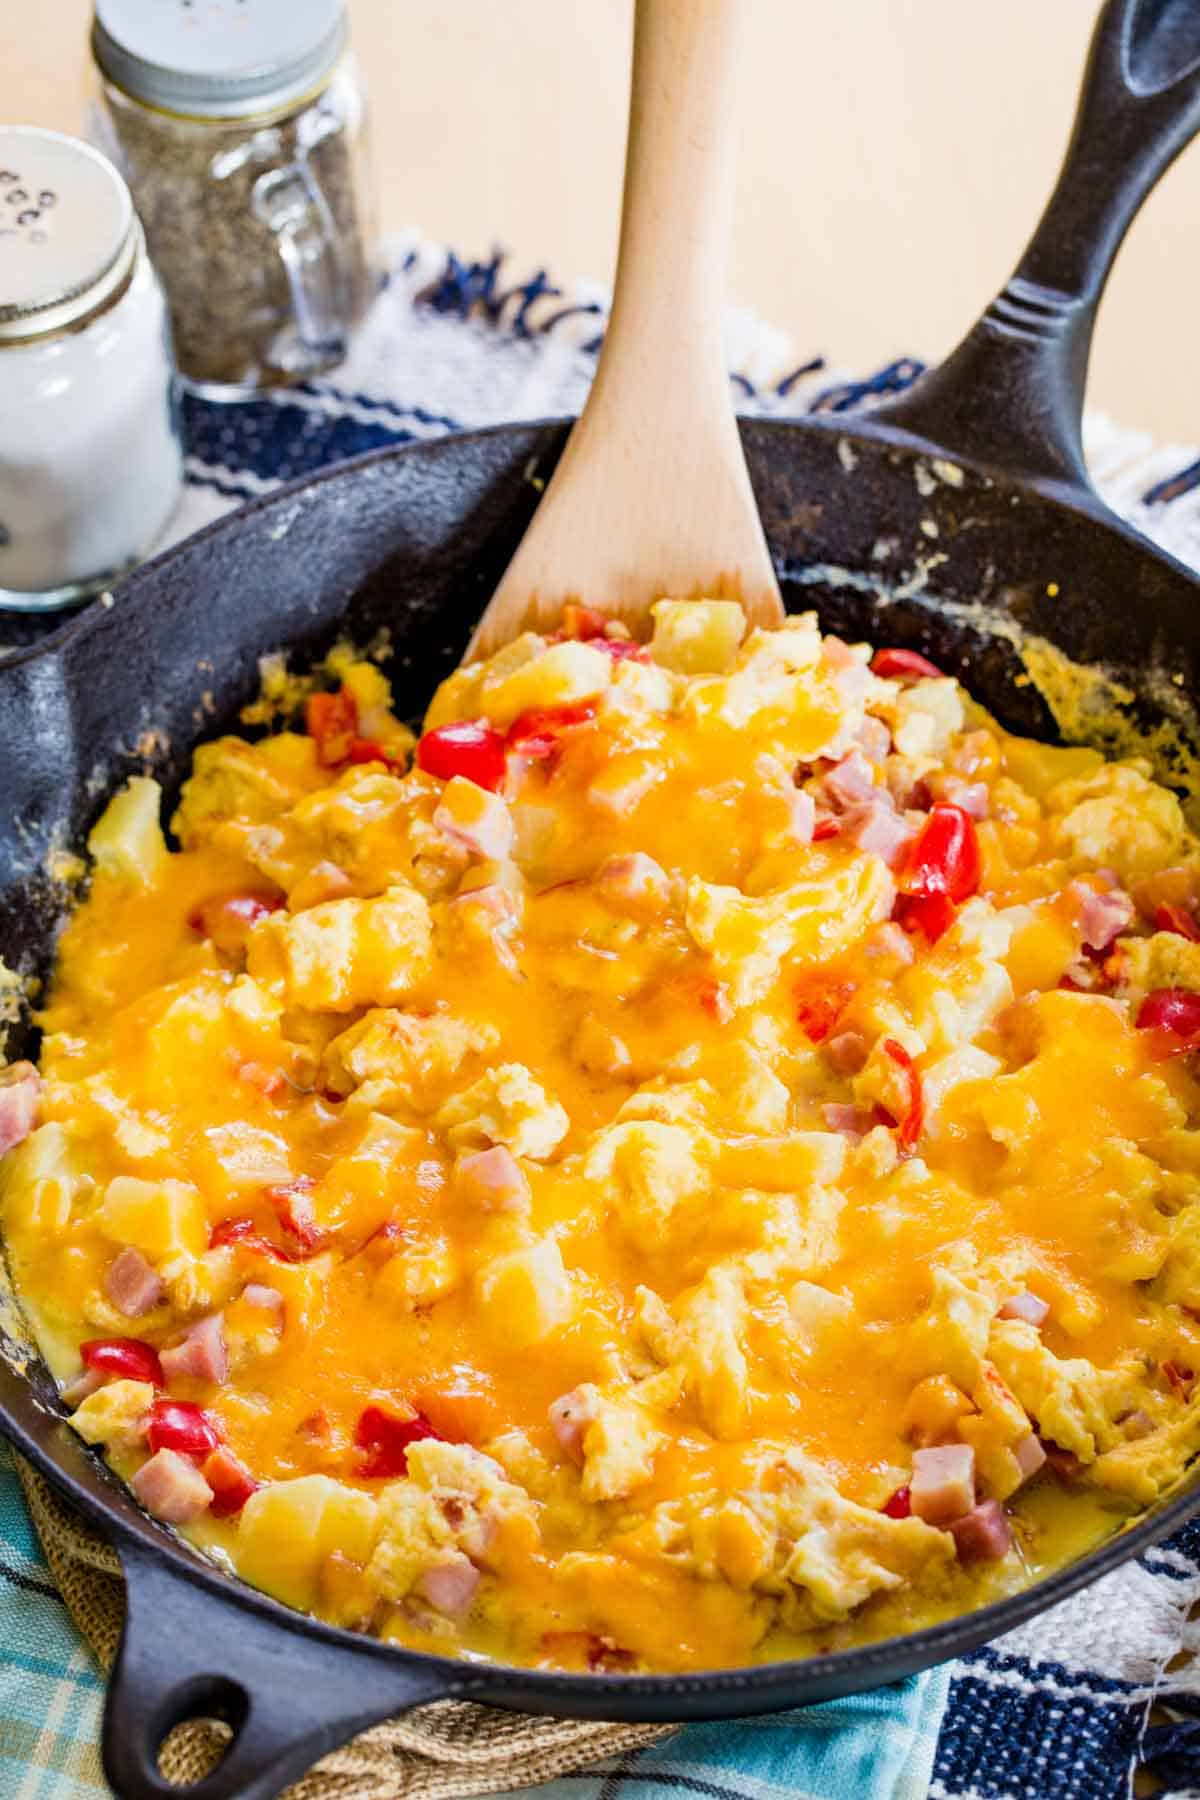 An egg scrambled with cheese, ham, tomato, and pineapple in a cast iron skillet.